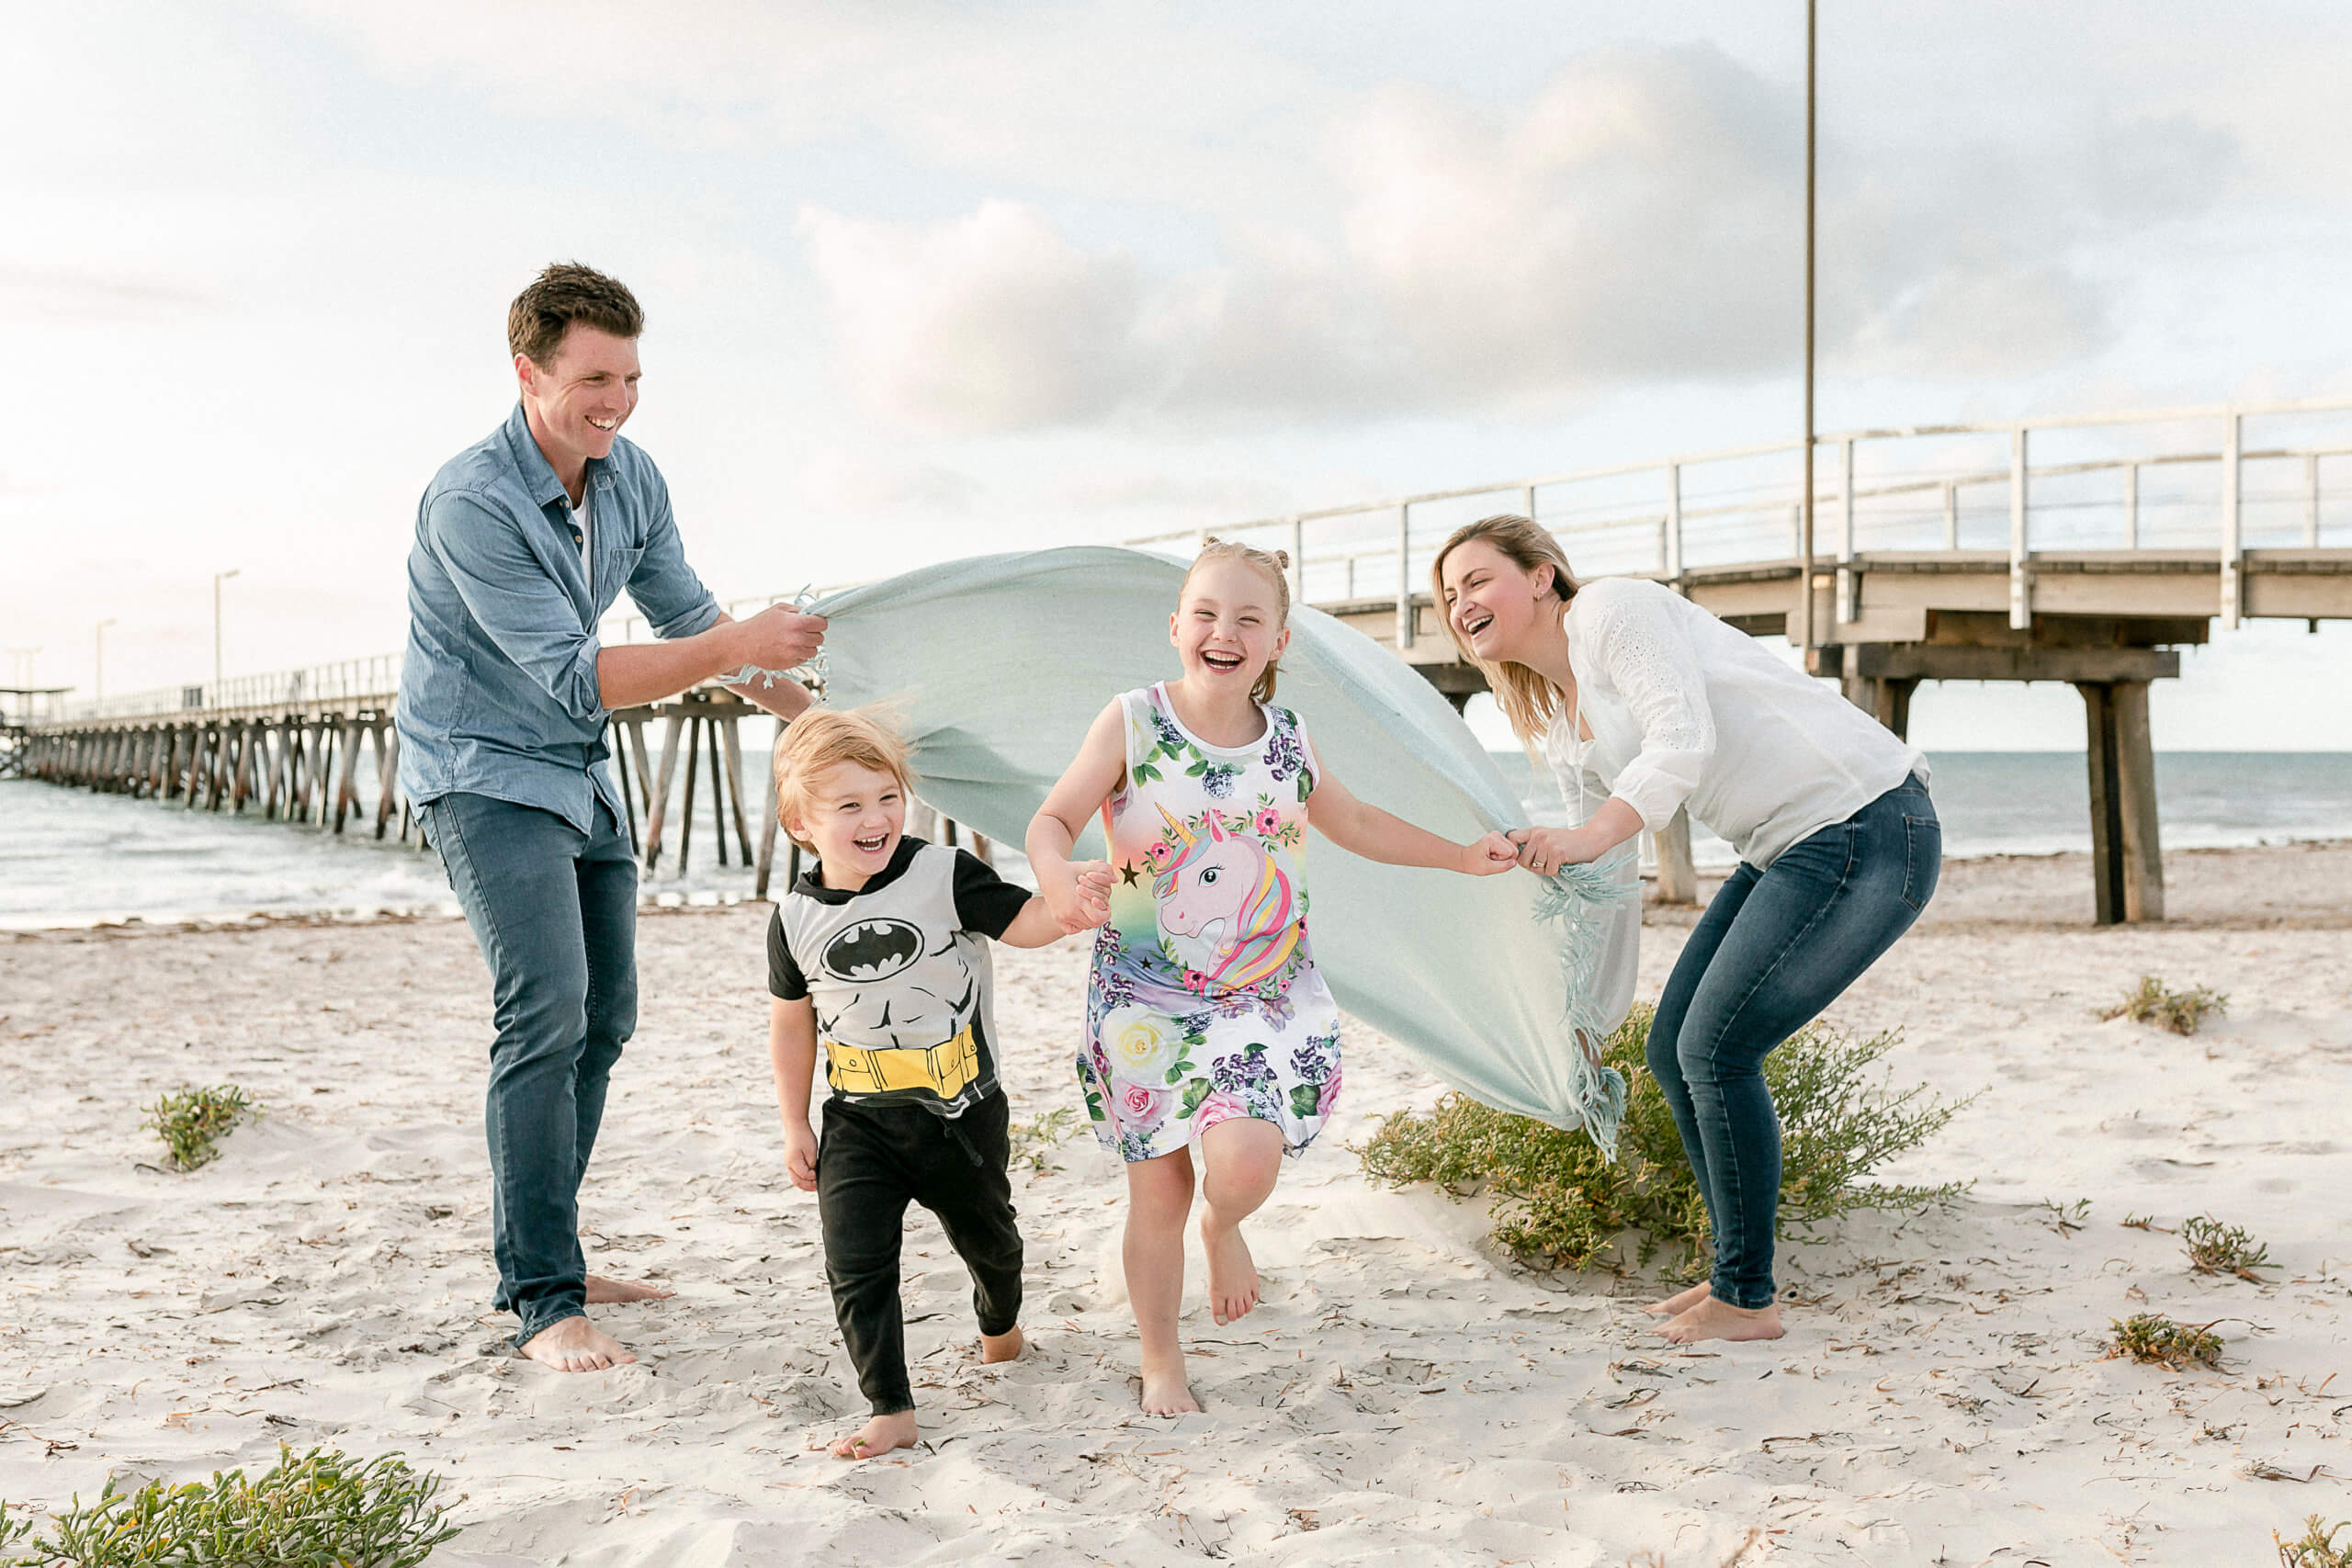 Session Information, Adelaide Newborn Photography